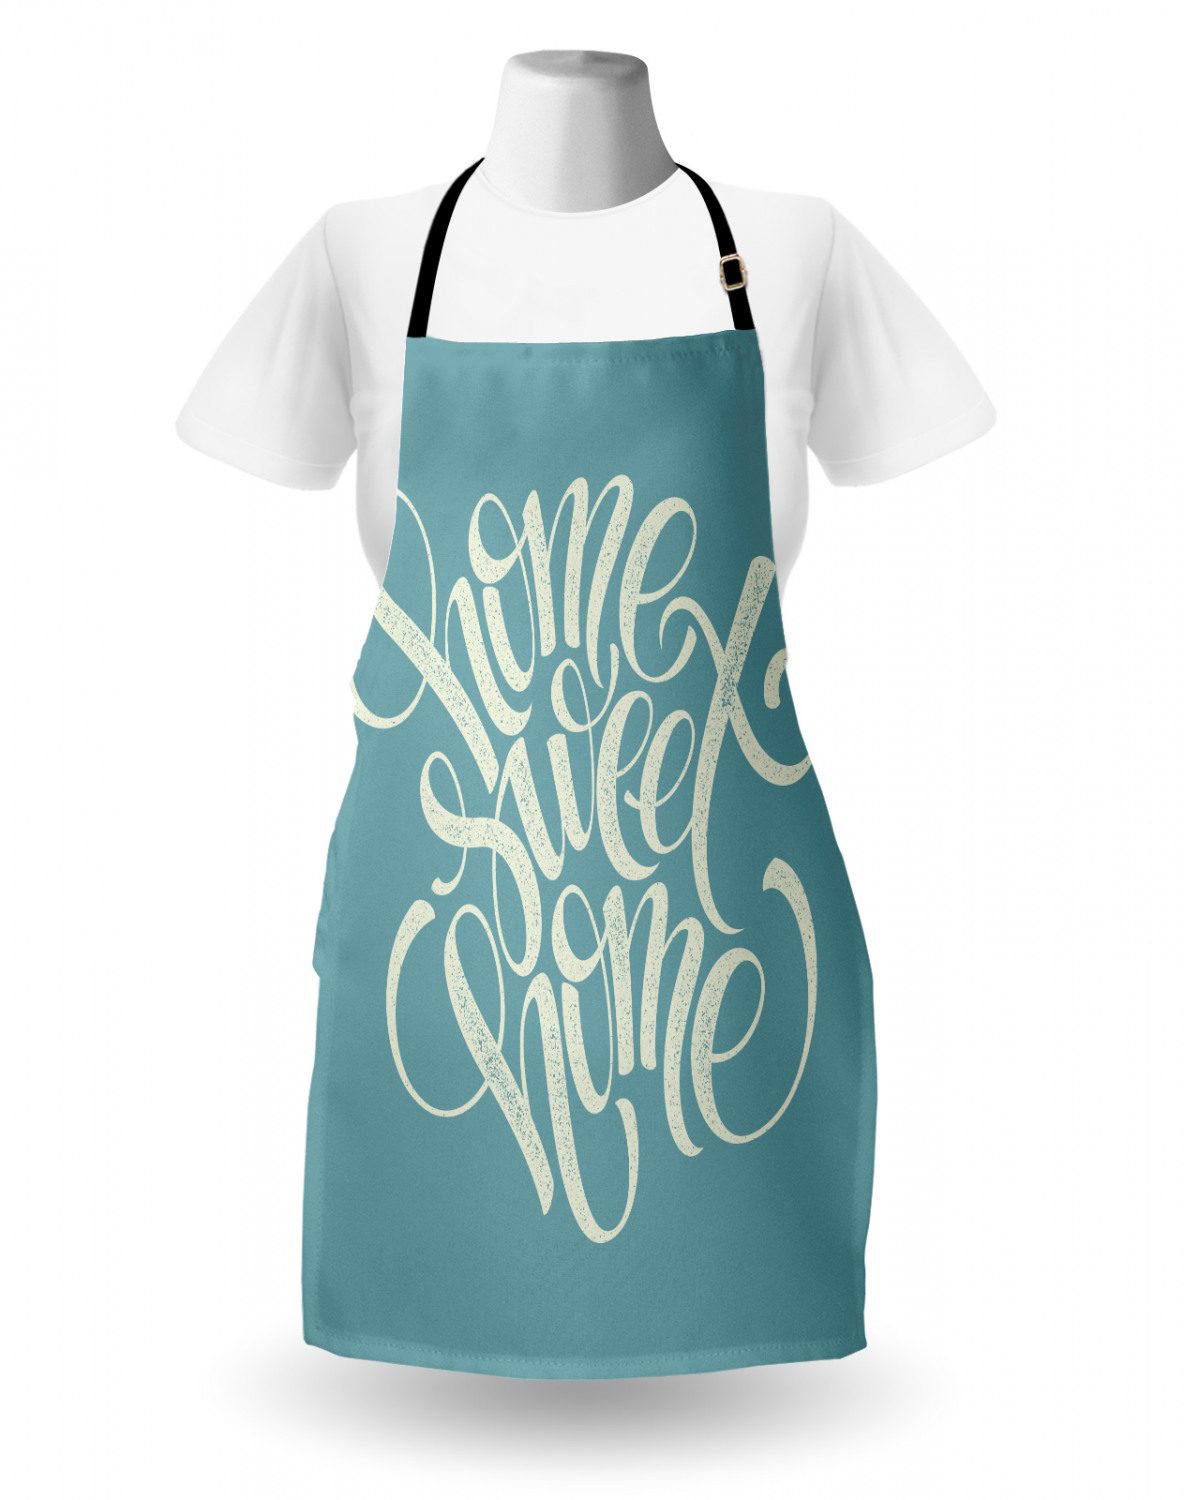 Home Sweet Home Apron Unisex Kitchen Bib with Adjustable Neck Cooking 